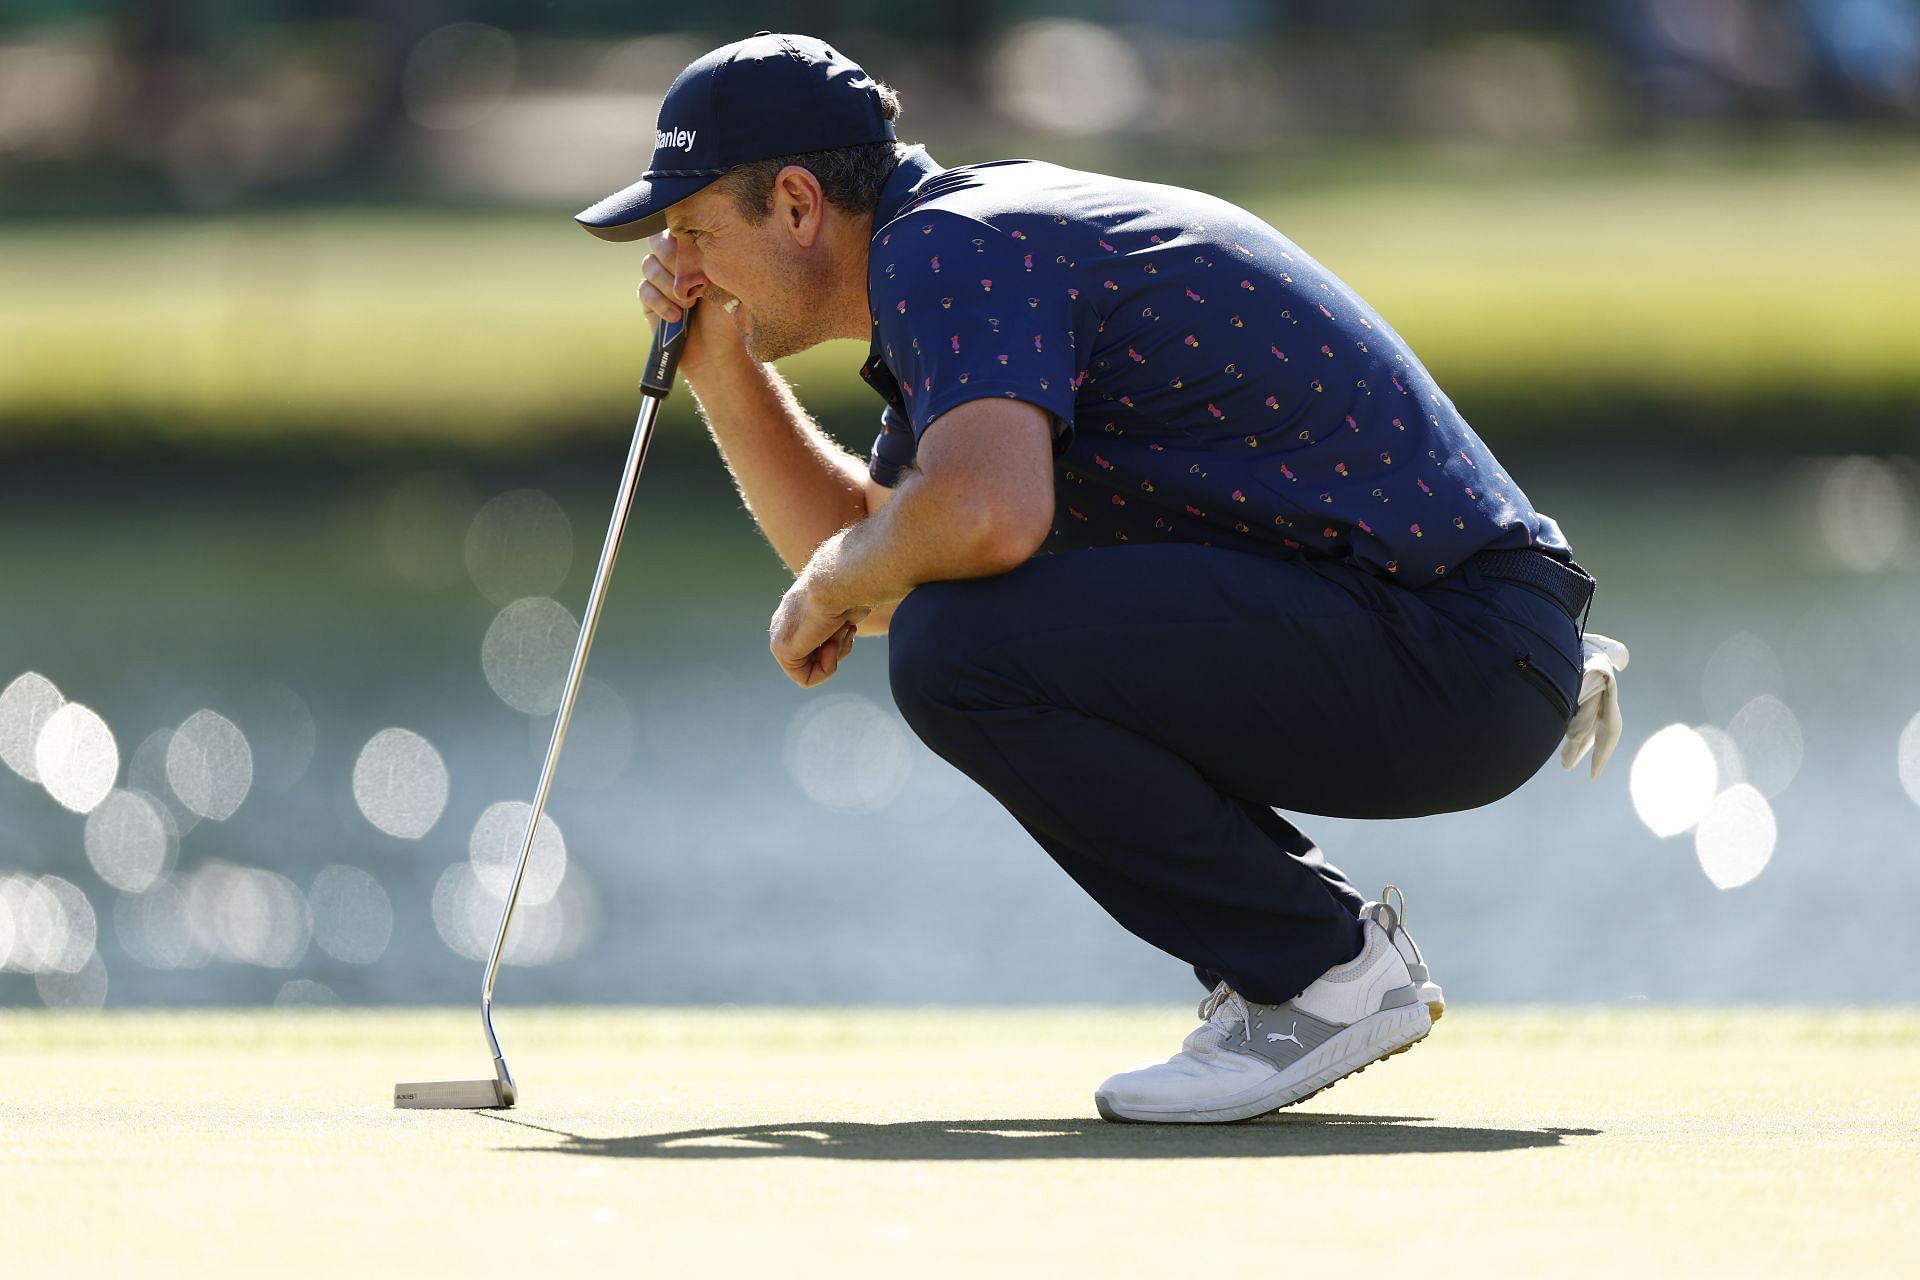 2023 Valspar Championship Day 2 tee times and TV schedule